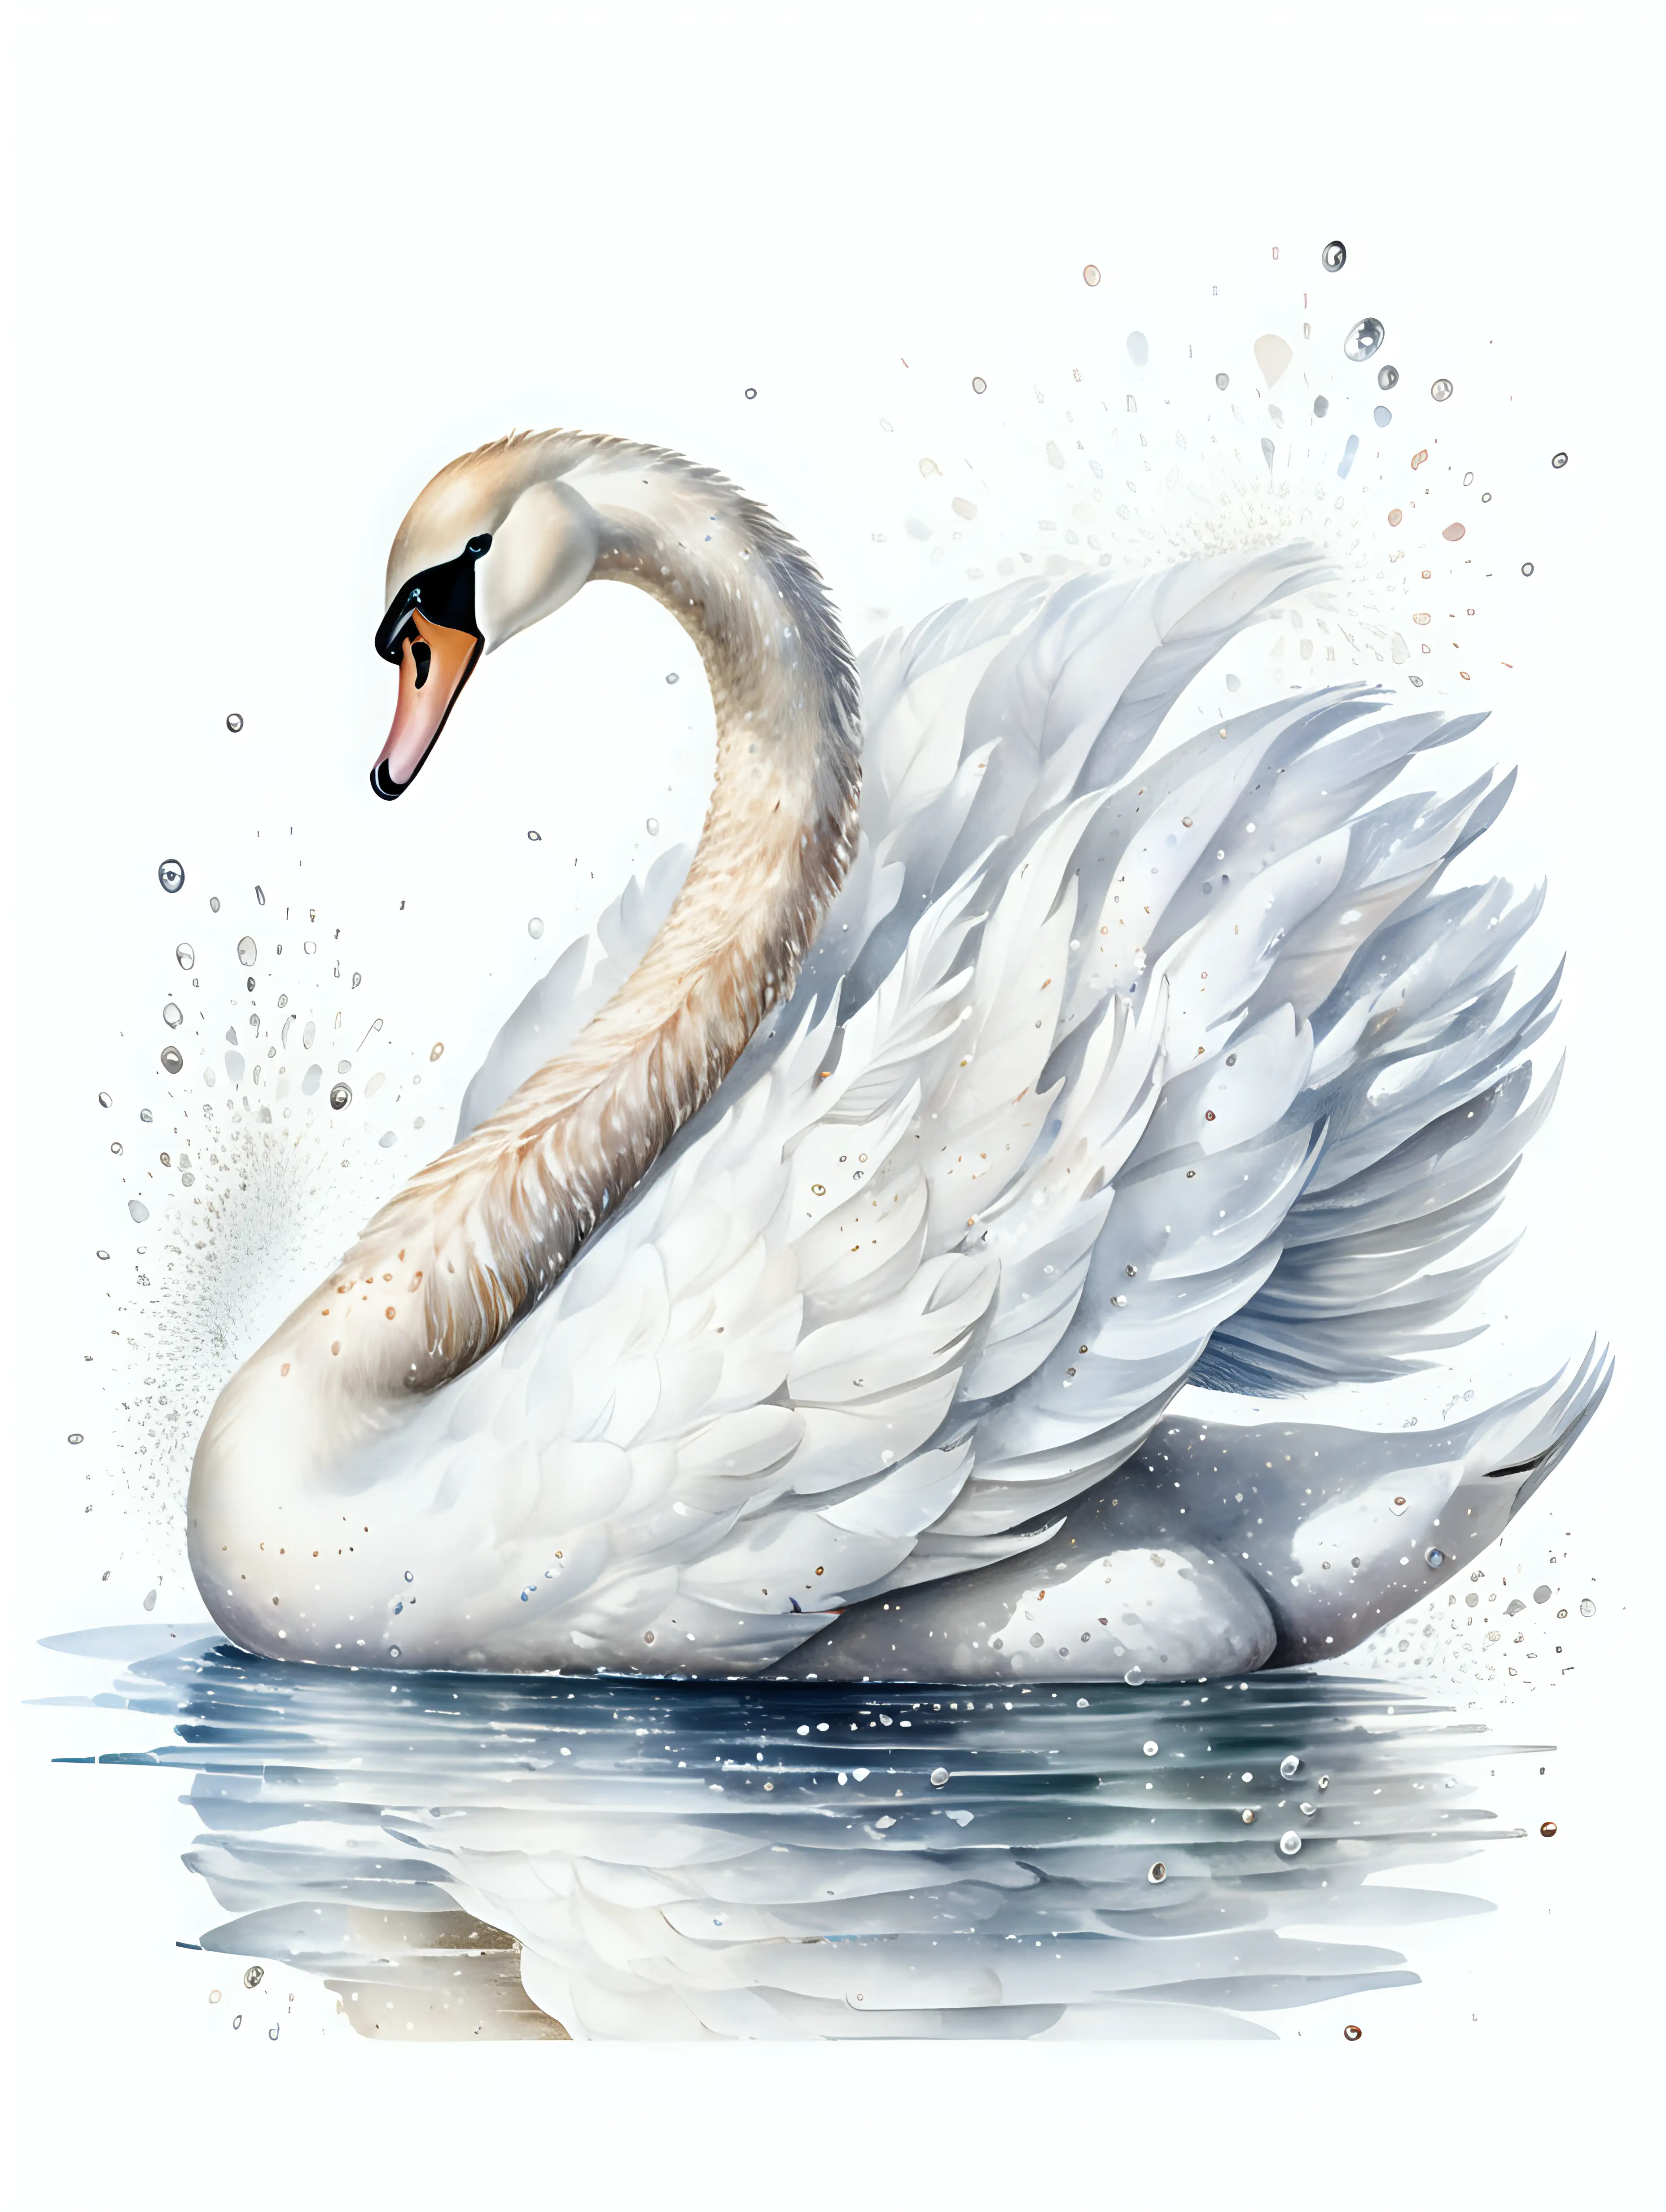 Ethereal White Swan Watercolor Illustration for Childrens Book